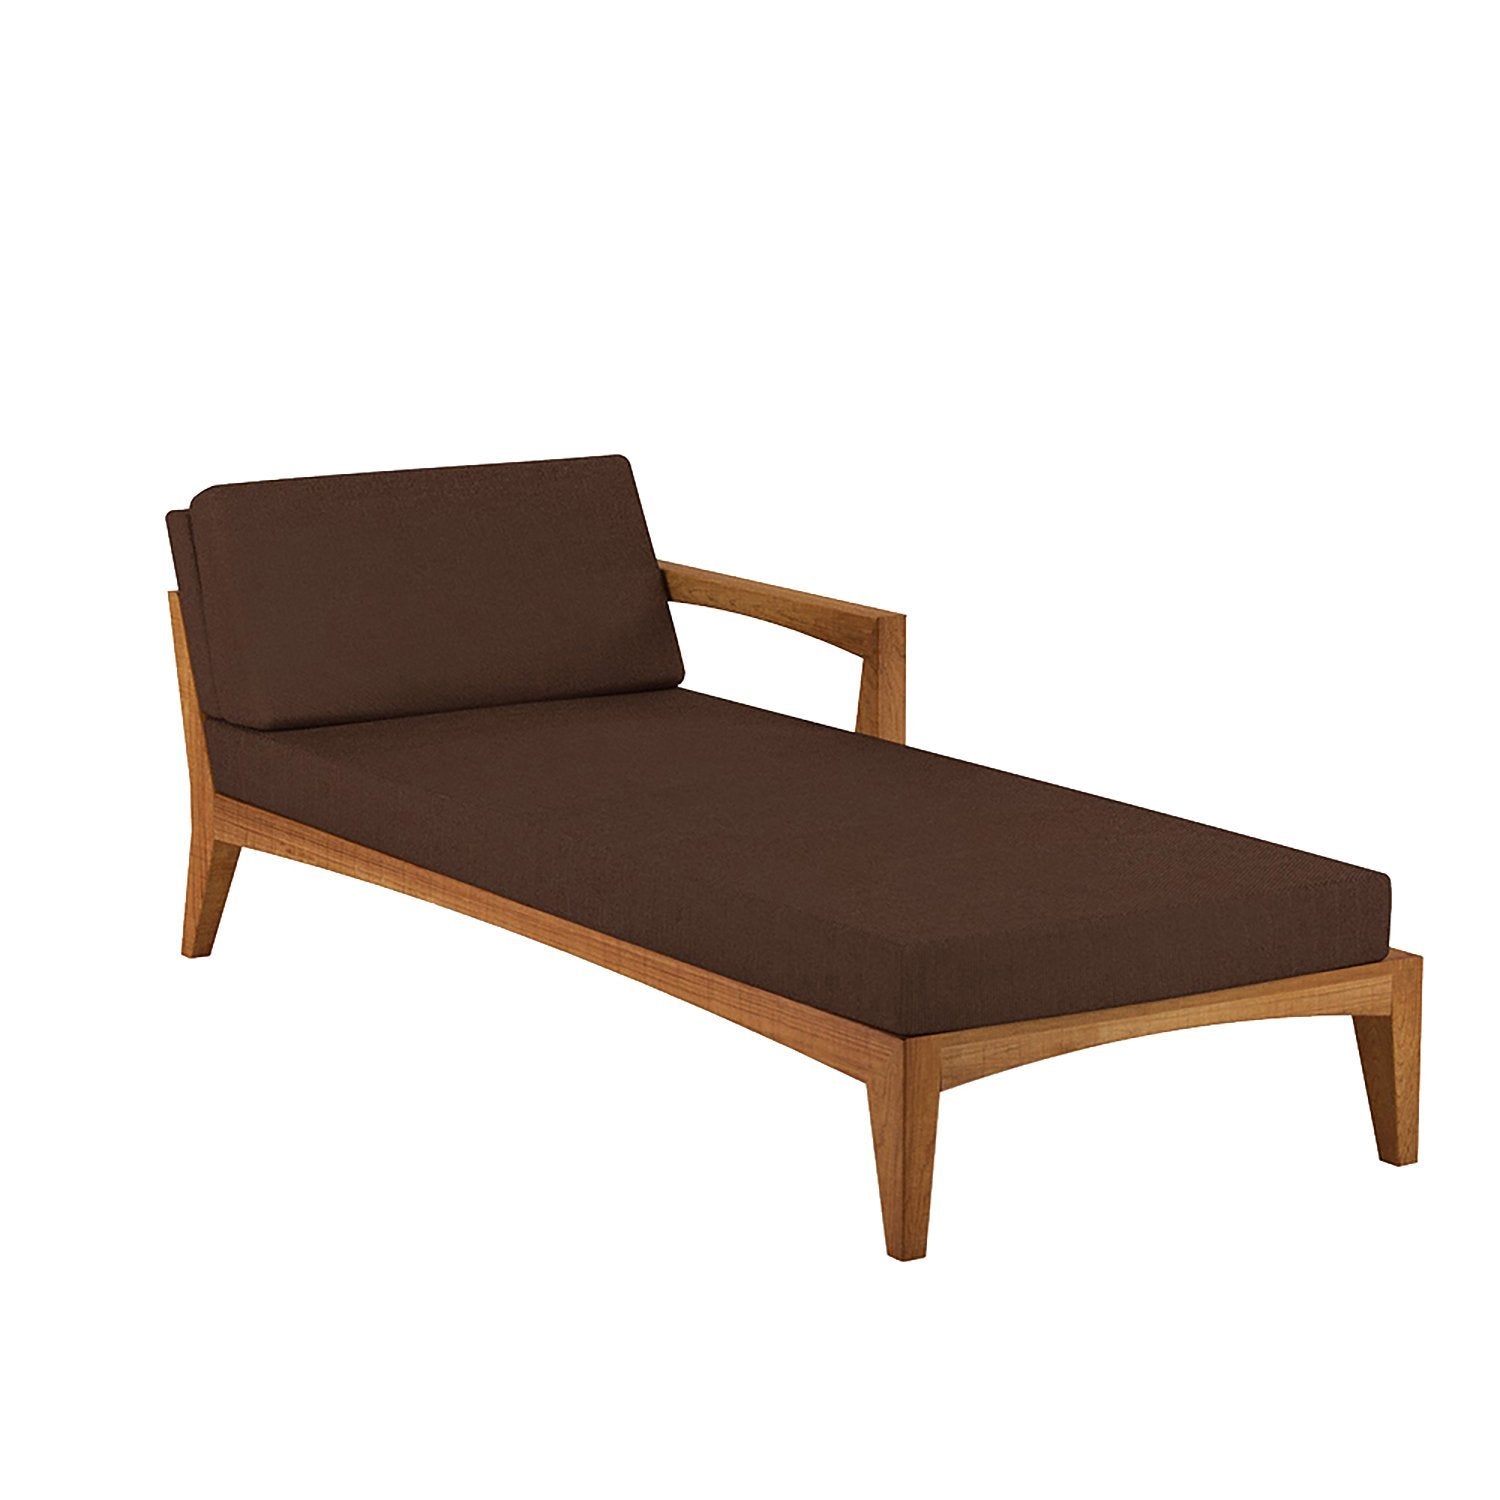 Zenhit Daybed Left Arm